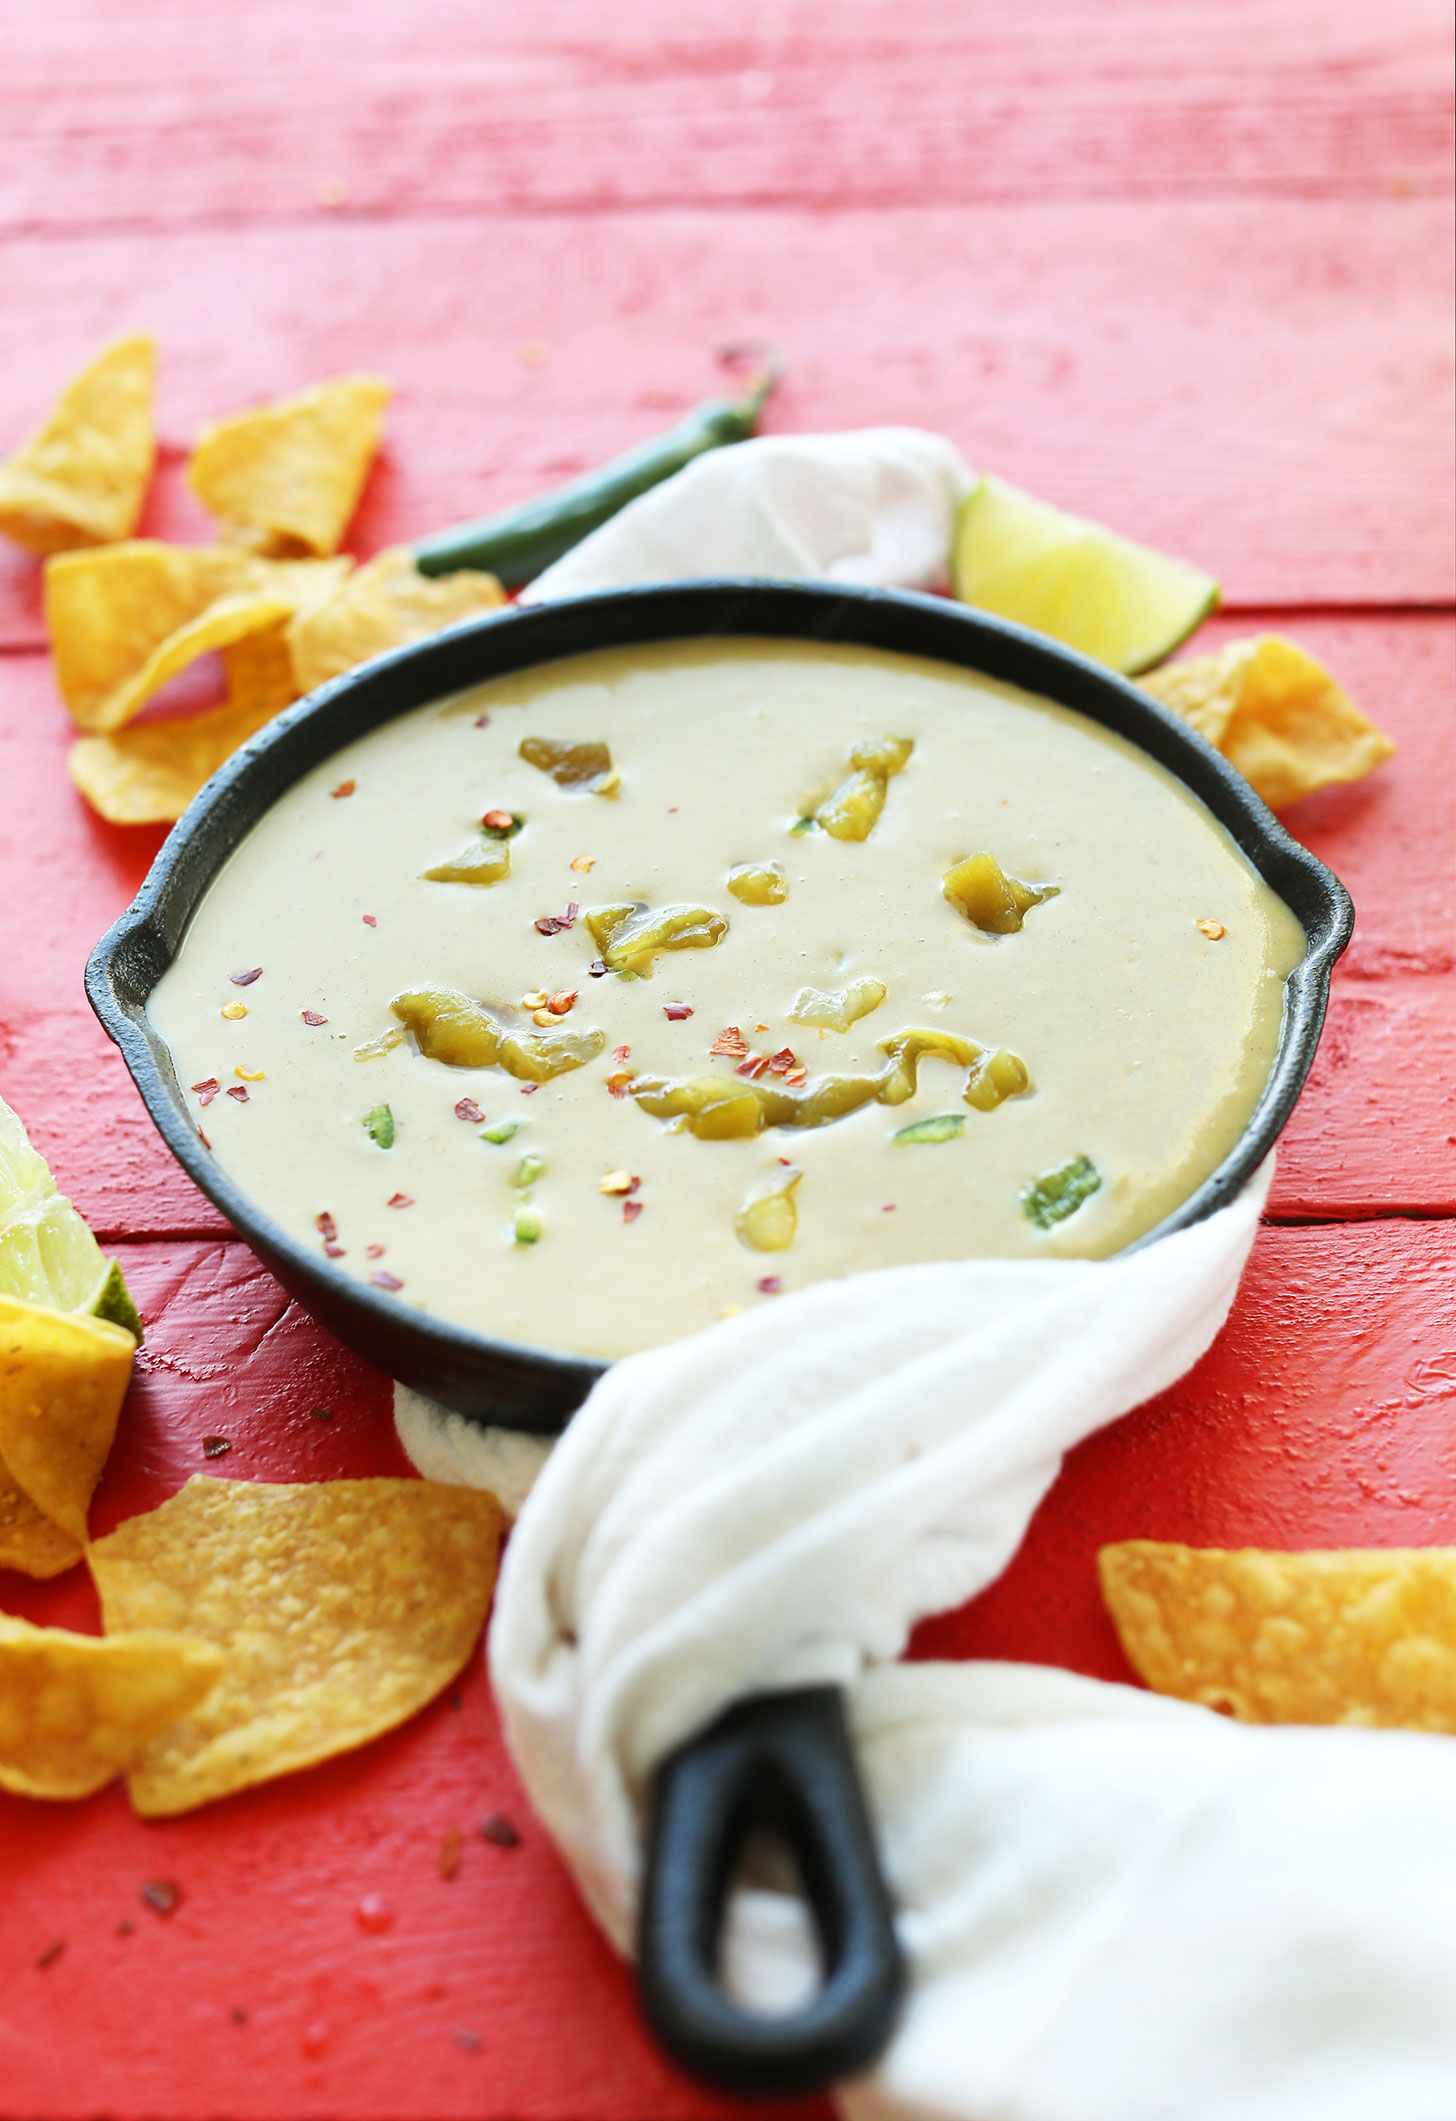 Tortillas chips and a cast-iron skillet filled with Green Chili Queso for the perfect vegan appetizer